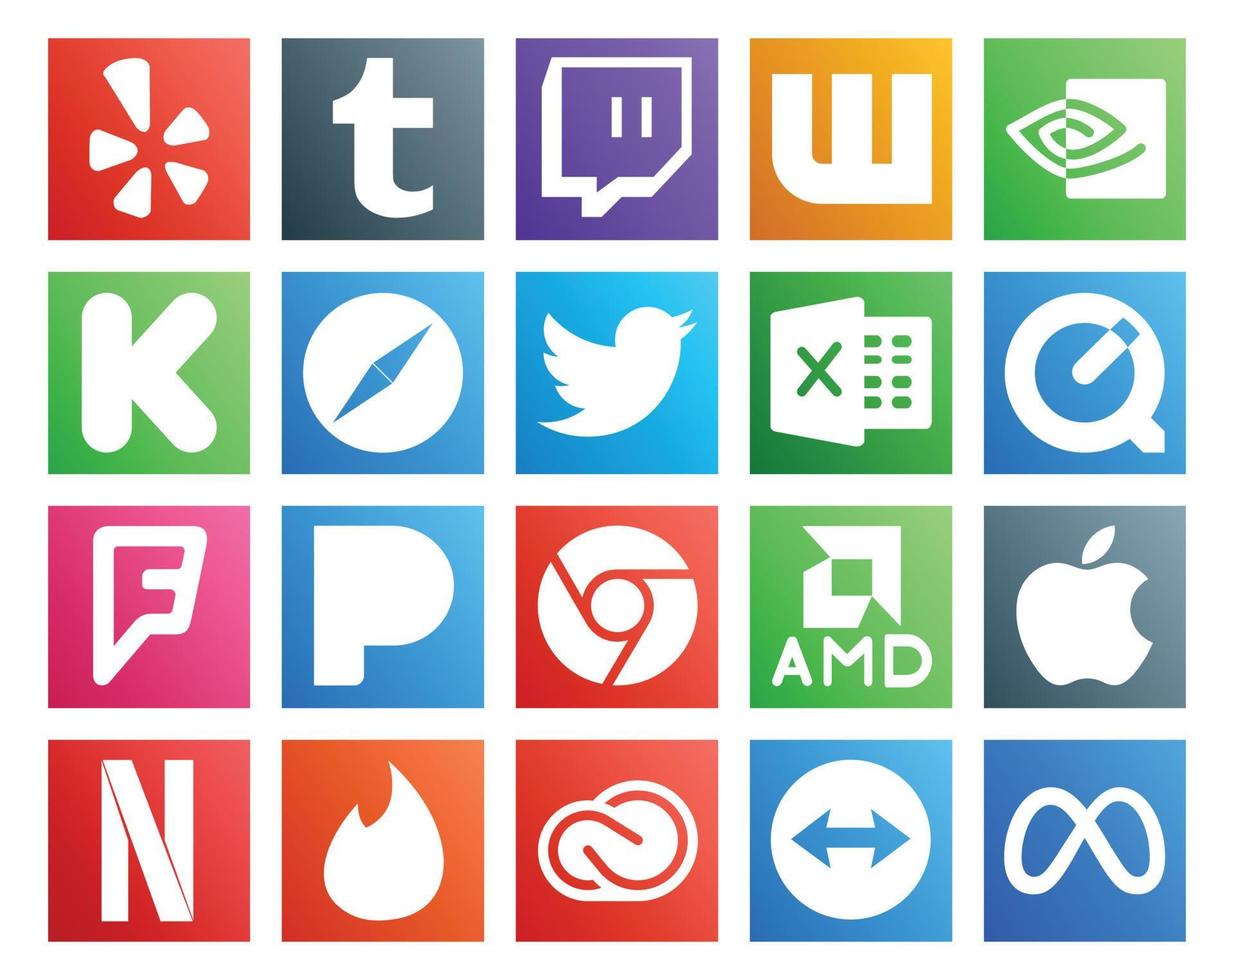 20 Social Media Icon Pack Including netflix amd twitter chrome foursquare vector